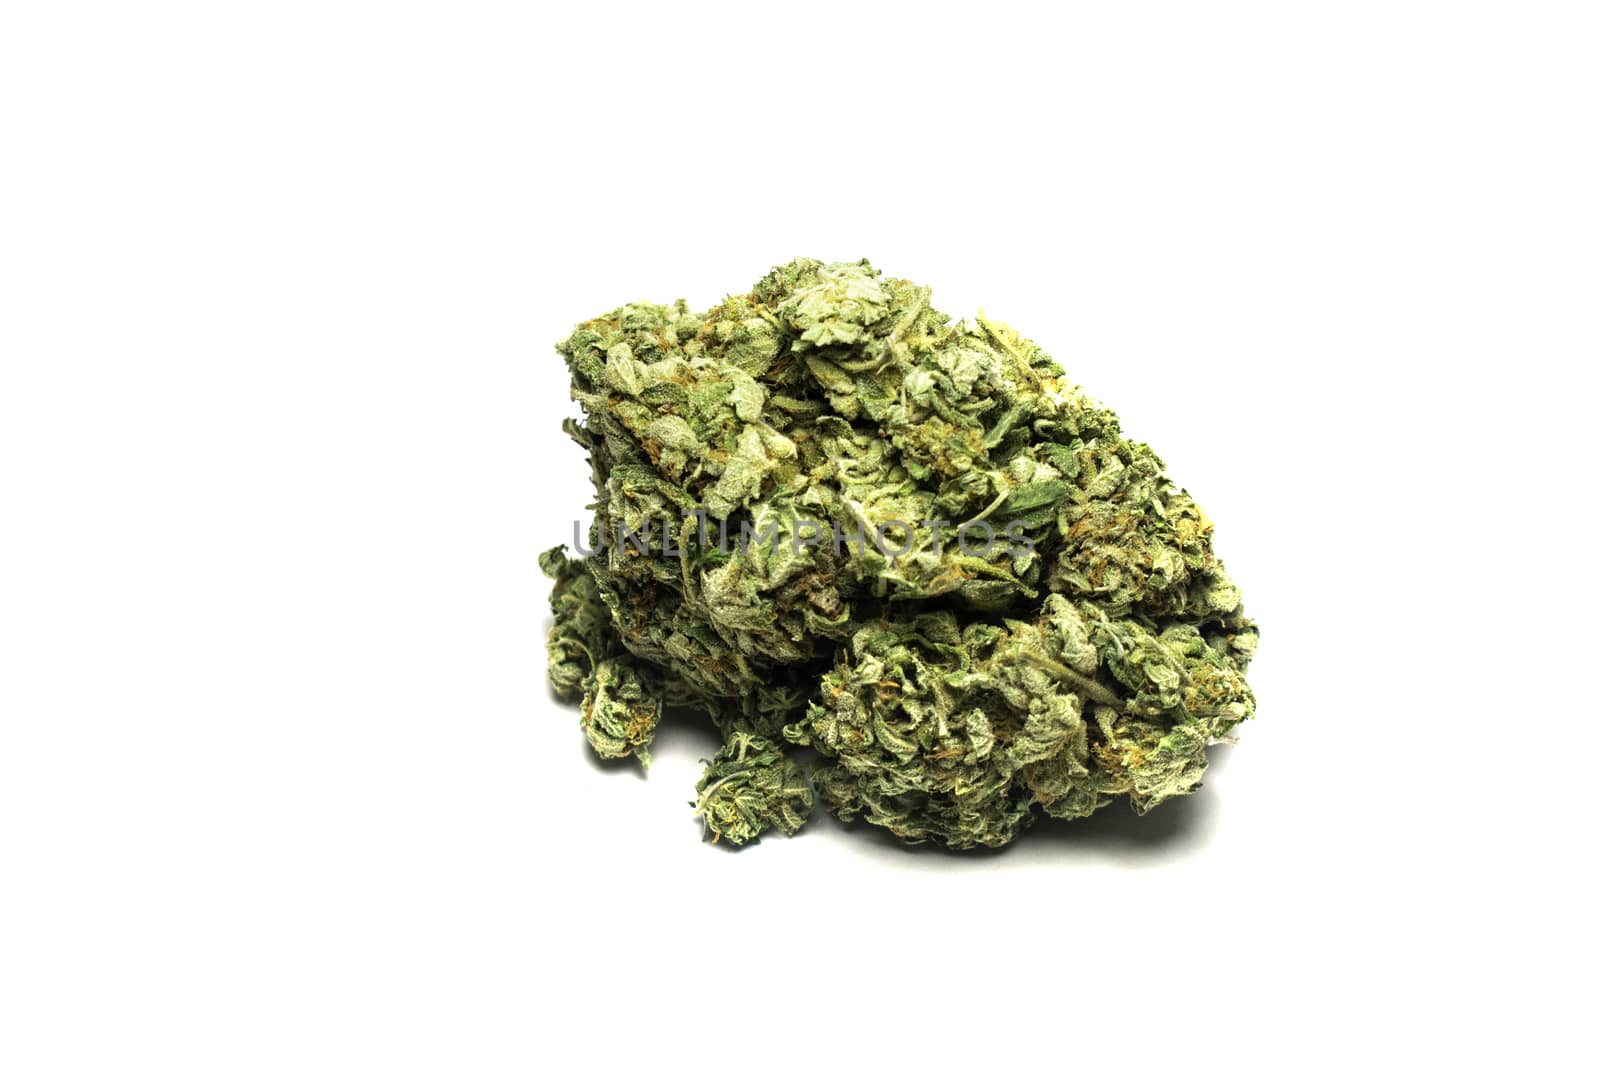 A Large Cannabis Nug on a Pure White Background by bju12290